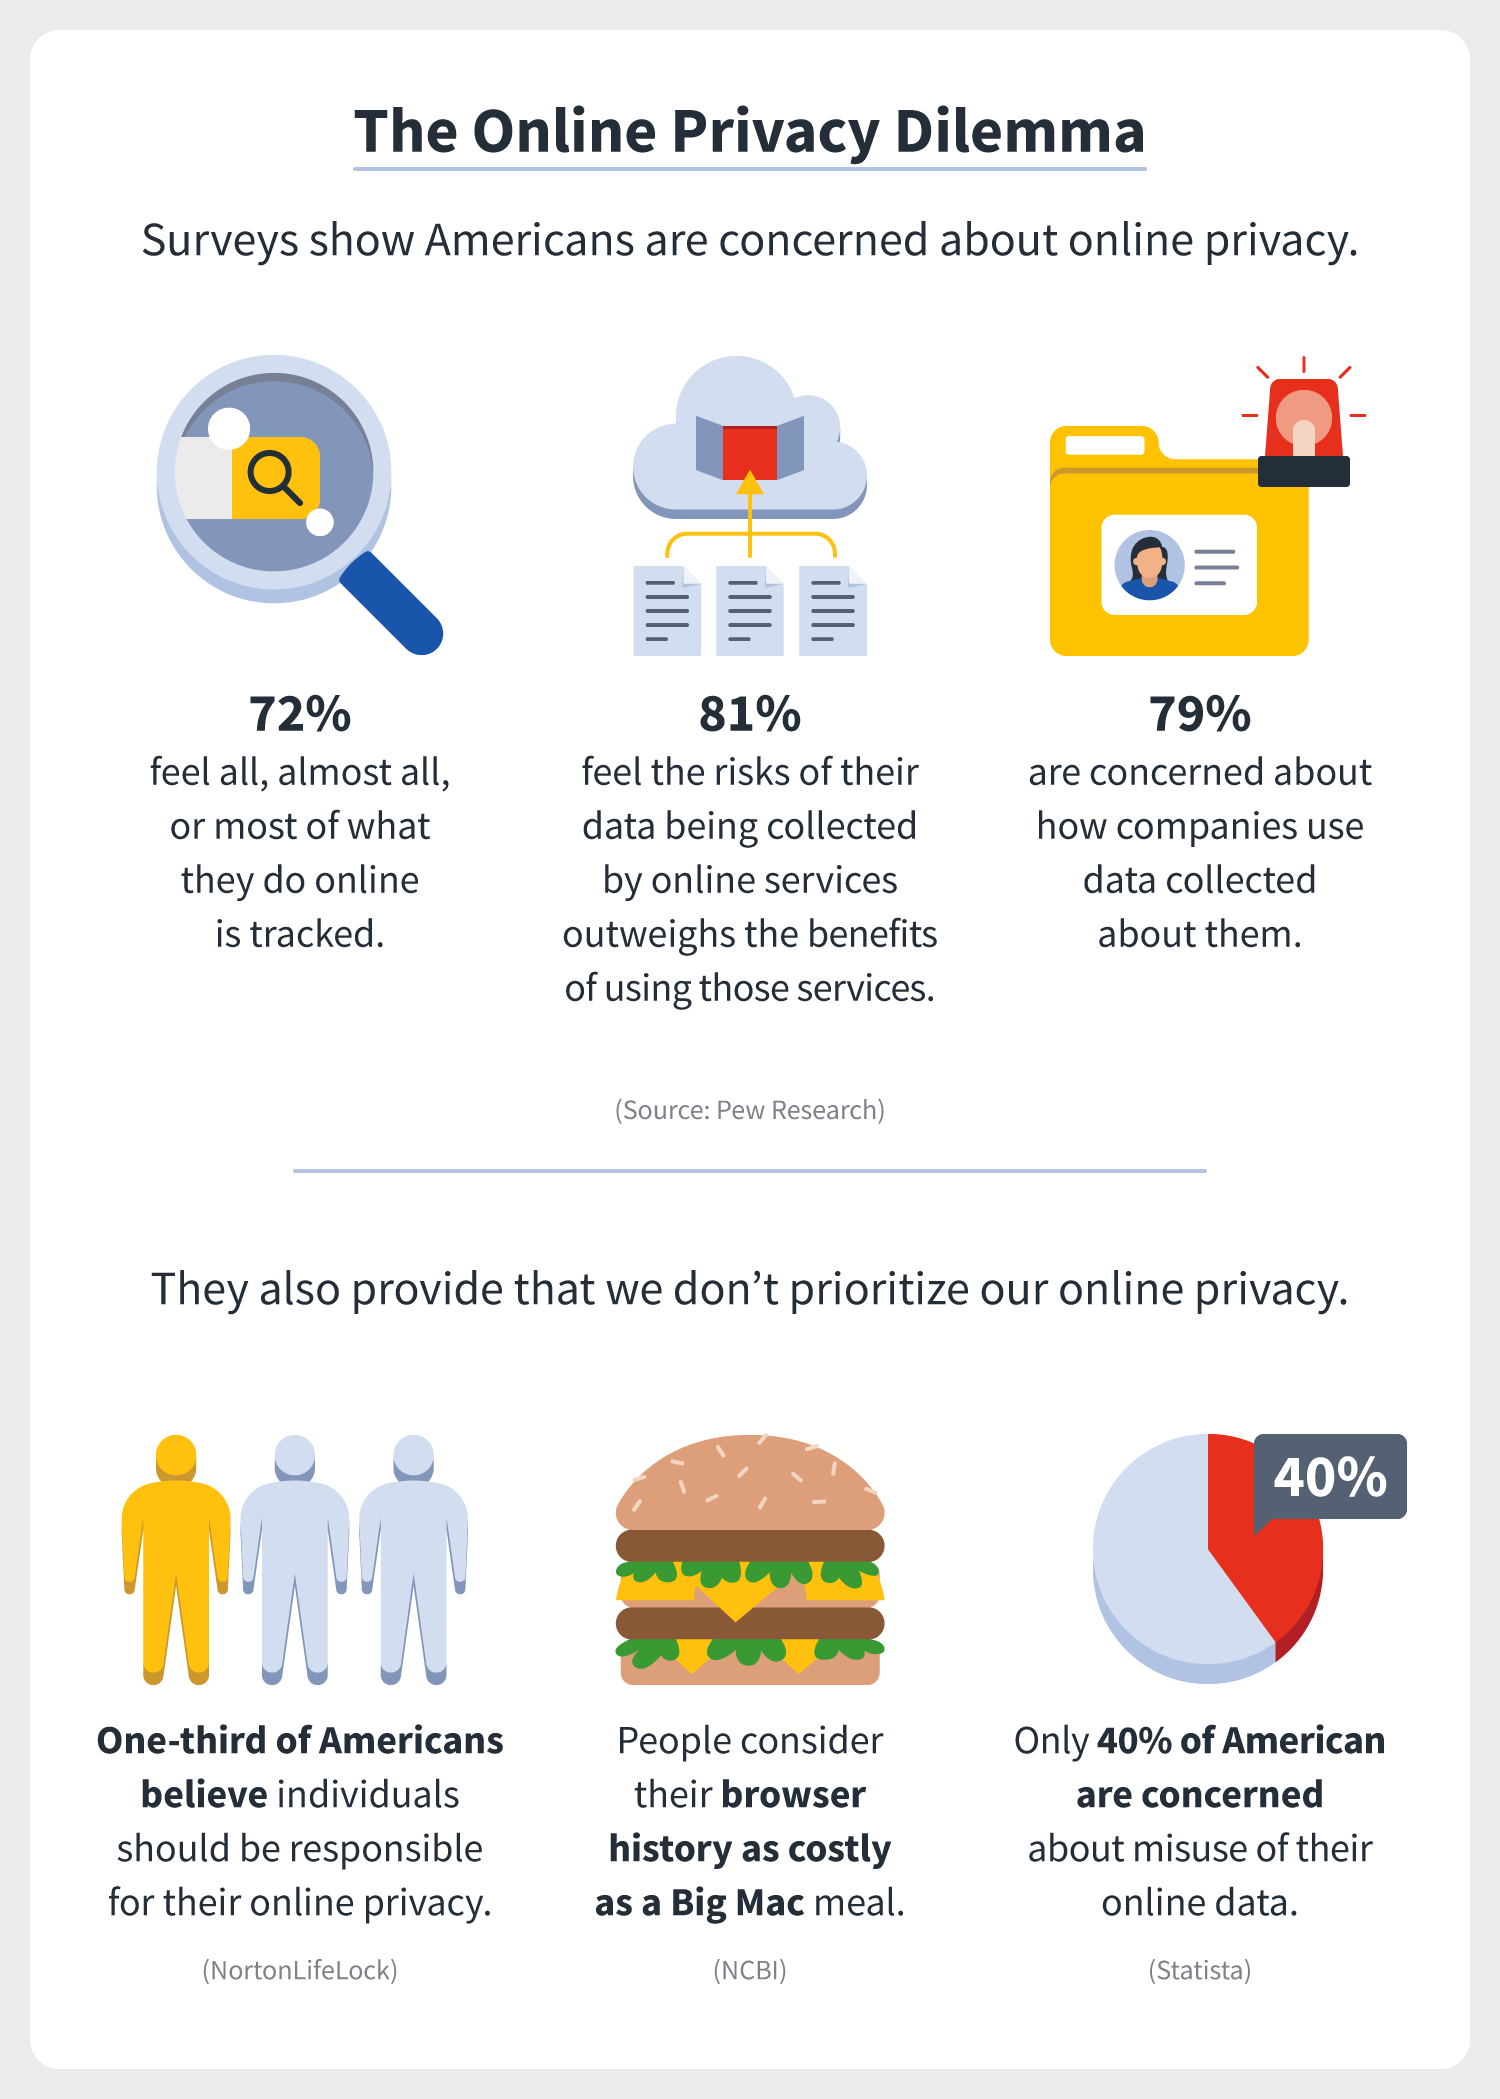 statistics regarding how concerned Americans are about protecting their online privacy versus how they prioritize their privacy, all of which alludes to the privacy paradox